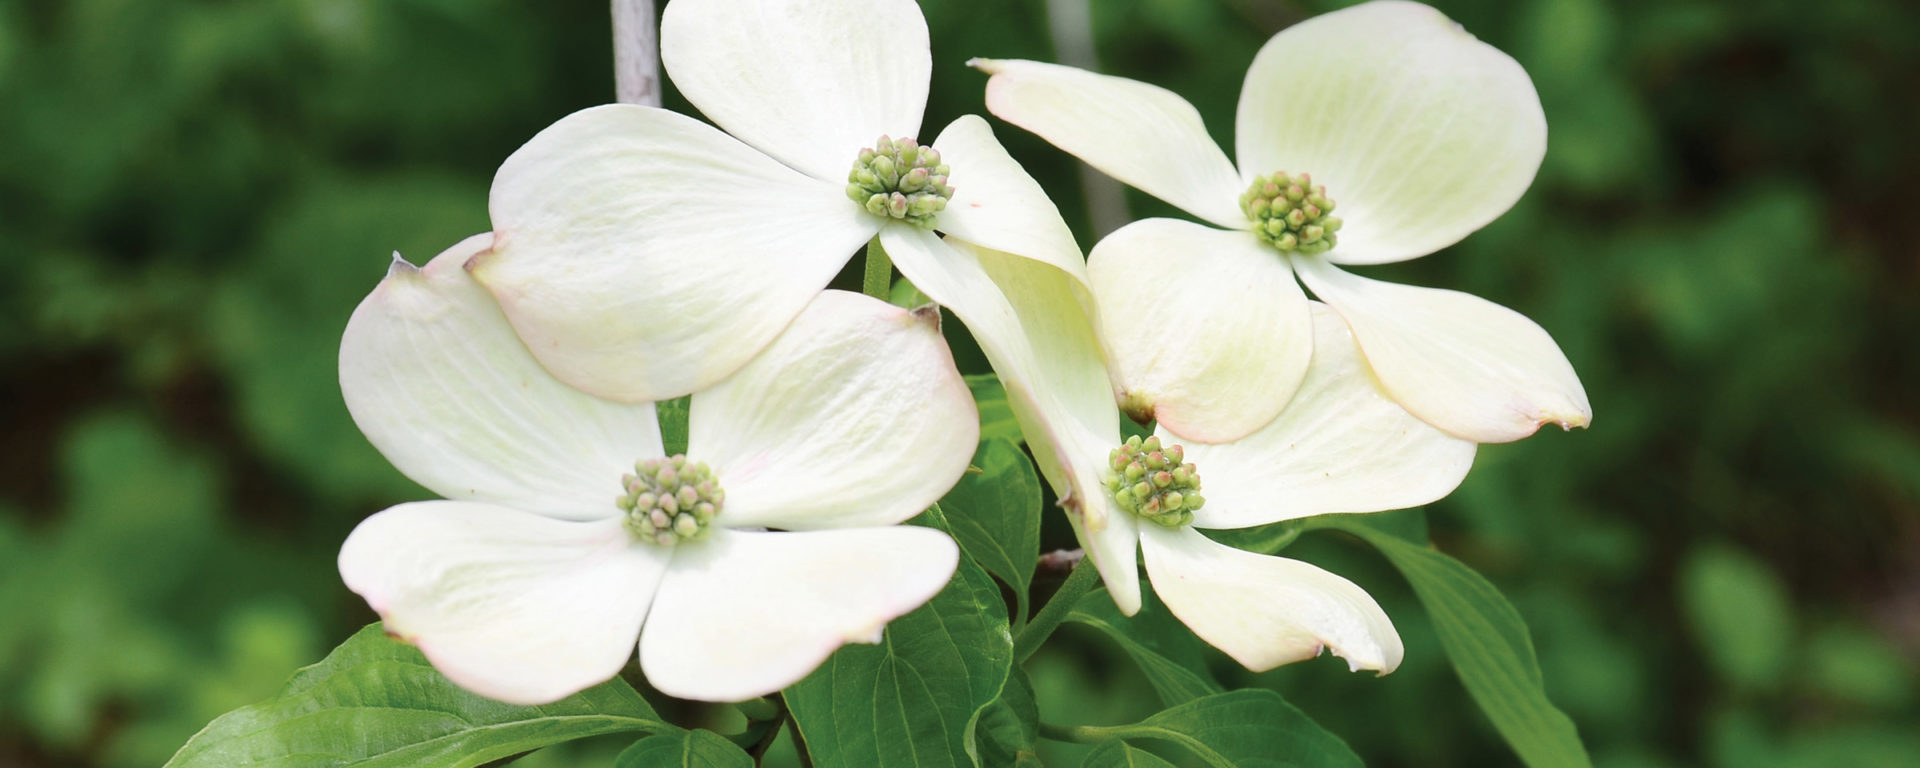 Close up of the Dogwood flower